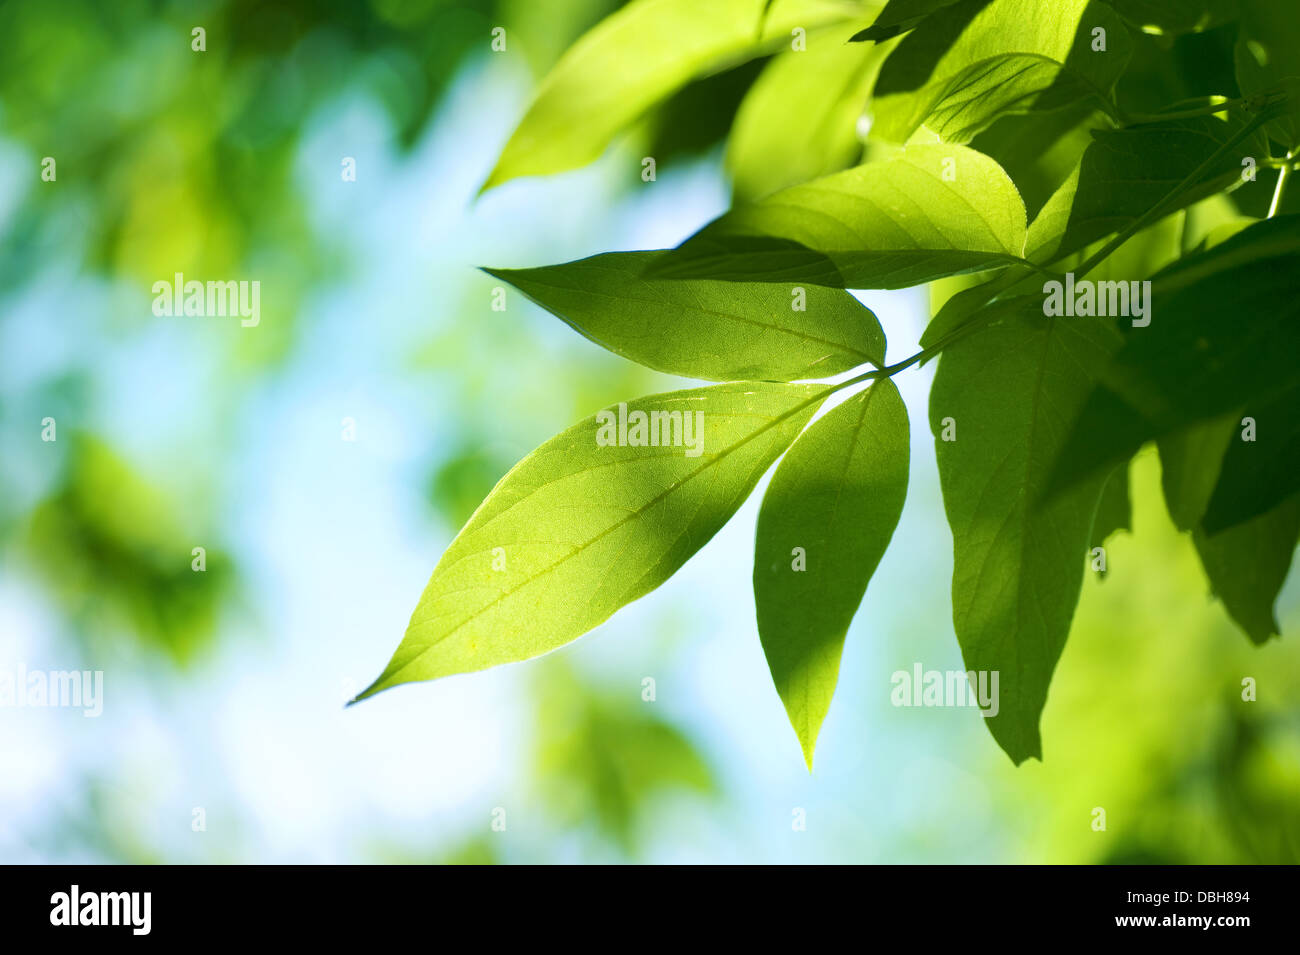 Green Leaves.Nature background Stock Photo